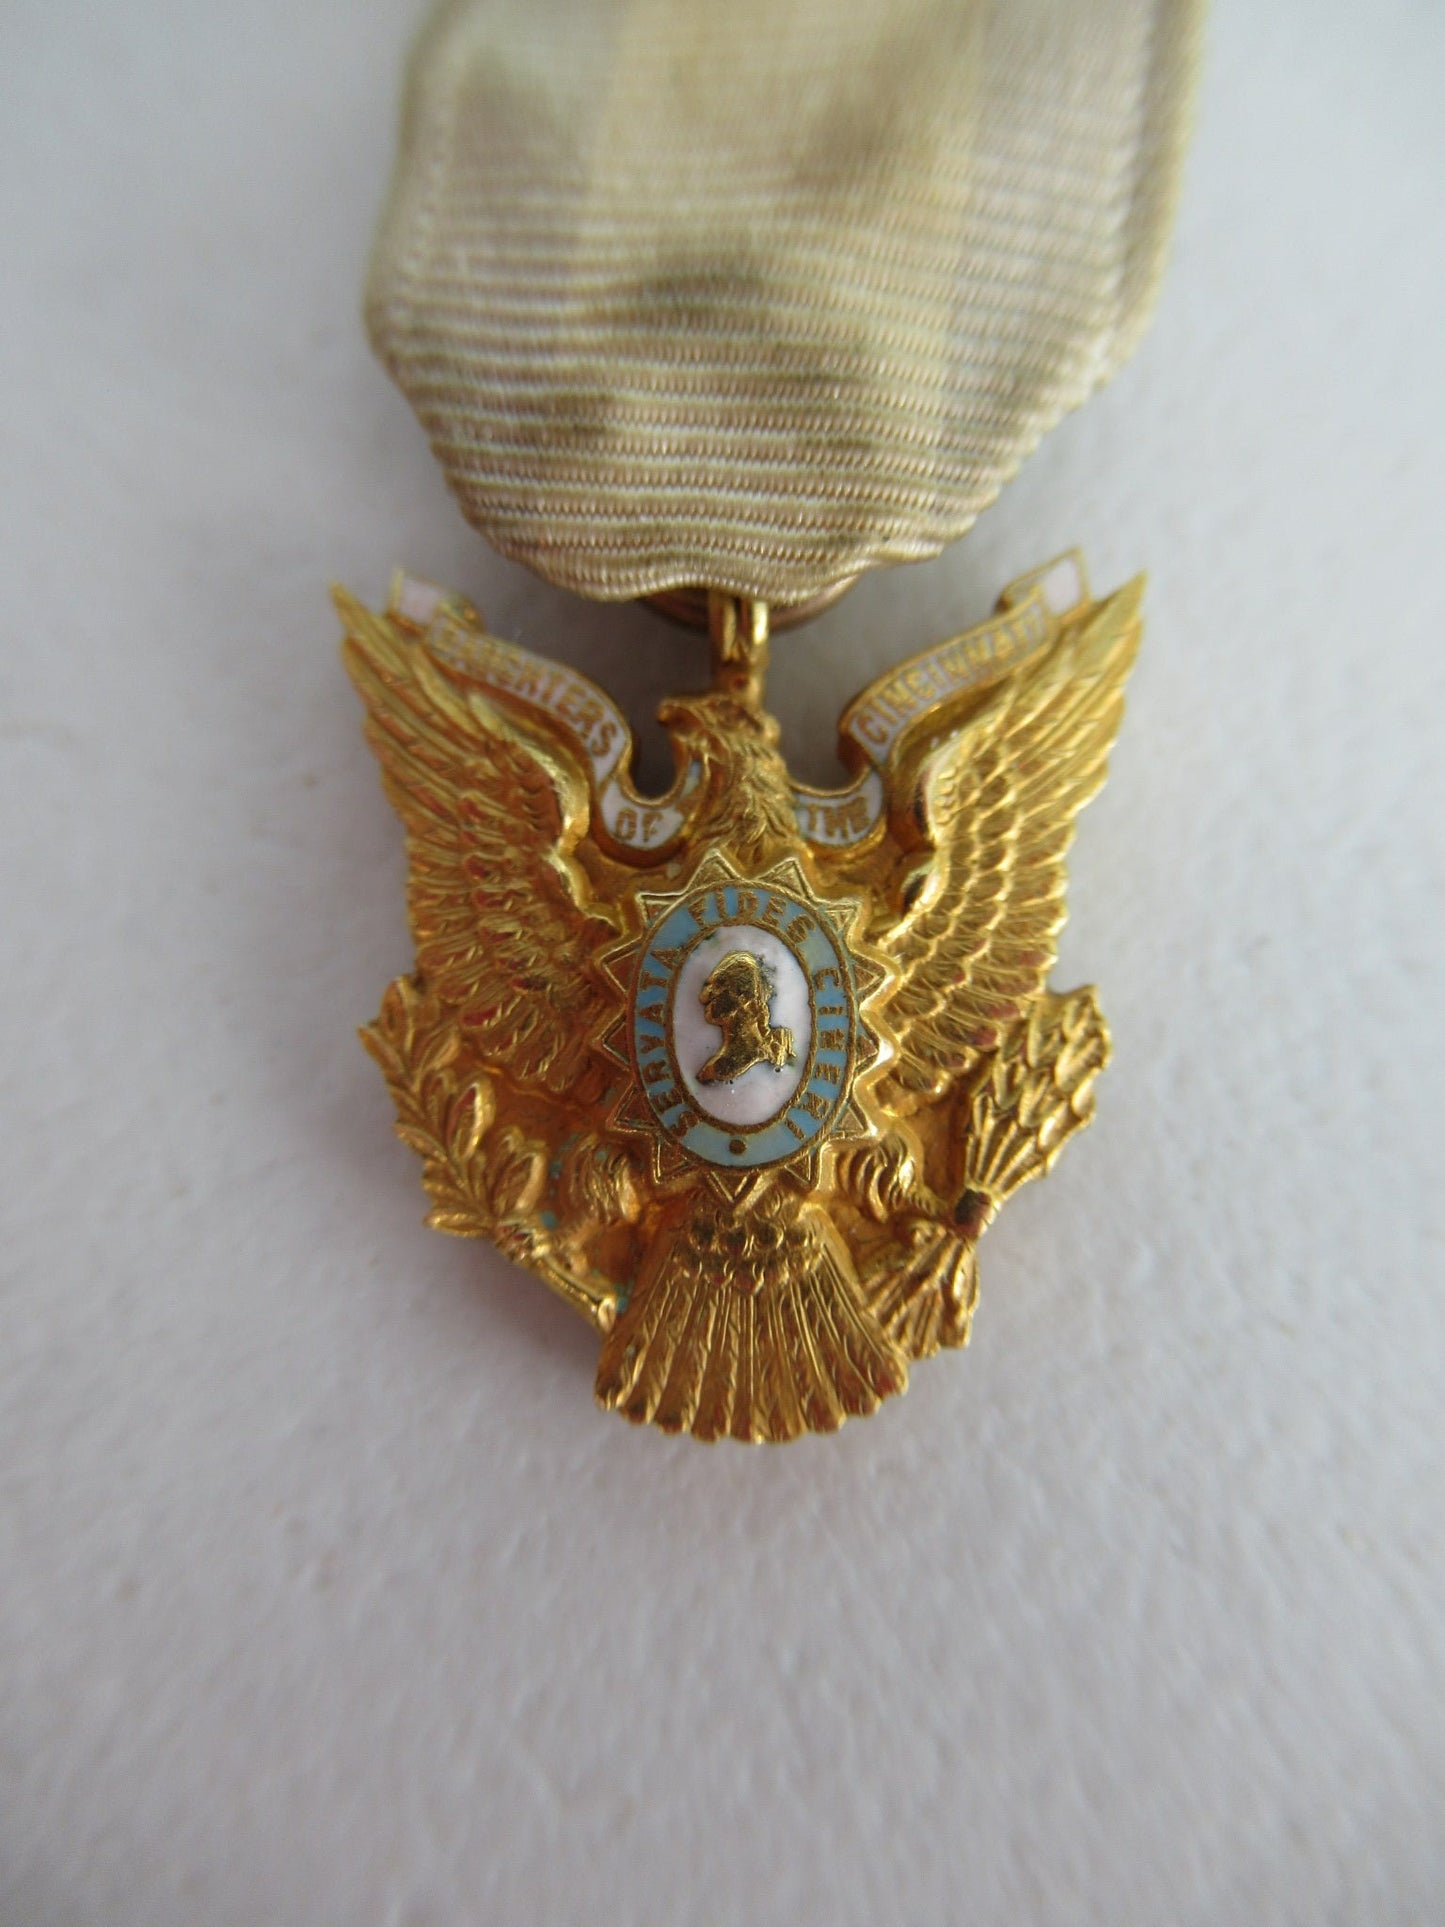 USA SOCIETY OF THE DAUGHTERS OF CINCINNATI BADGE MEDAL. MINIATURE MEDAL. MADE IN SOLID GOLD. NUMBERED 610. VERY RARE!